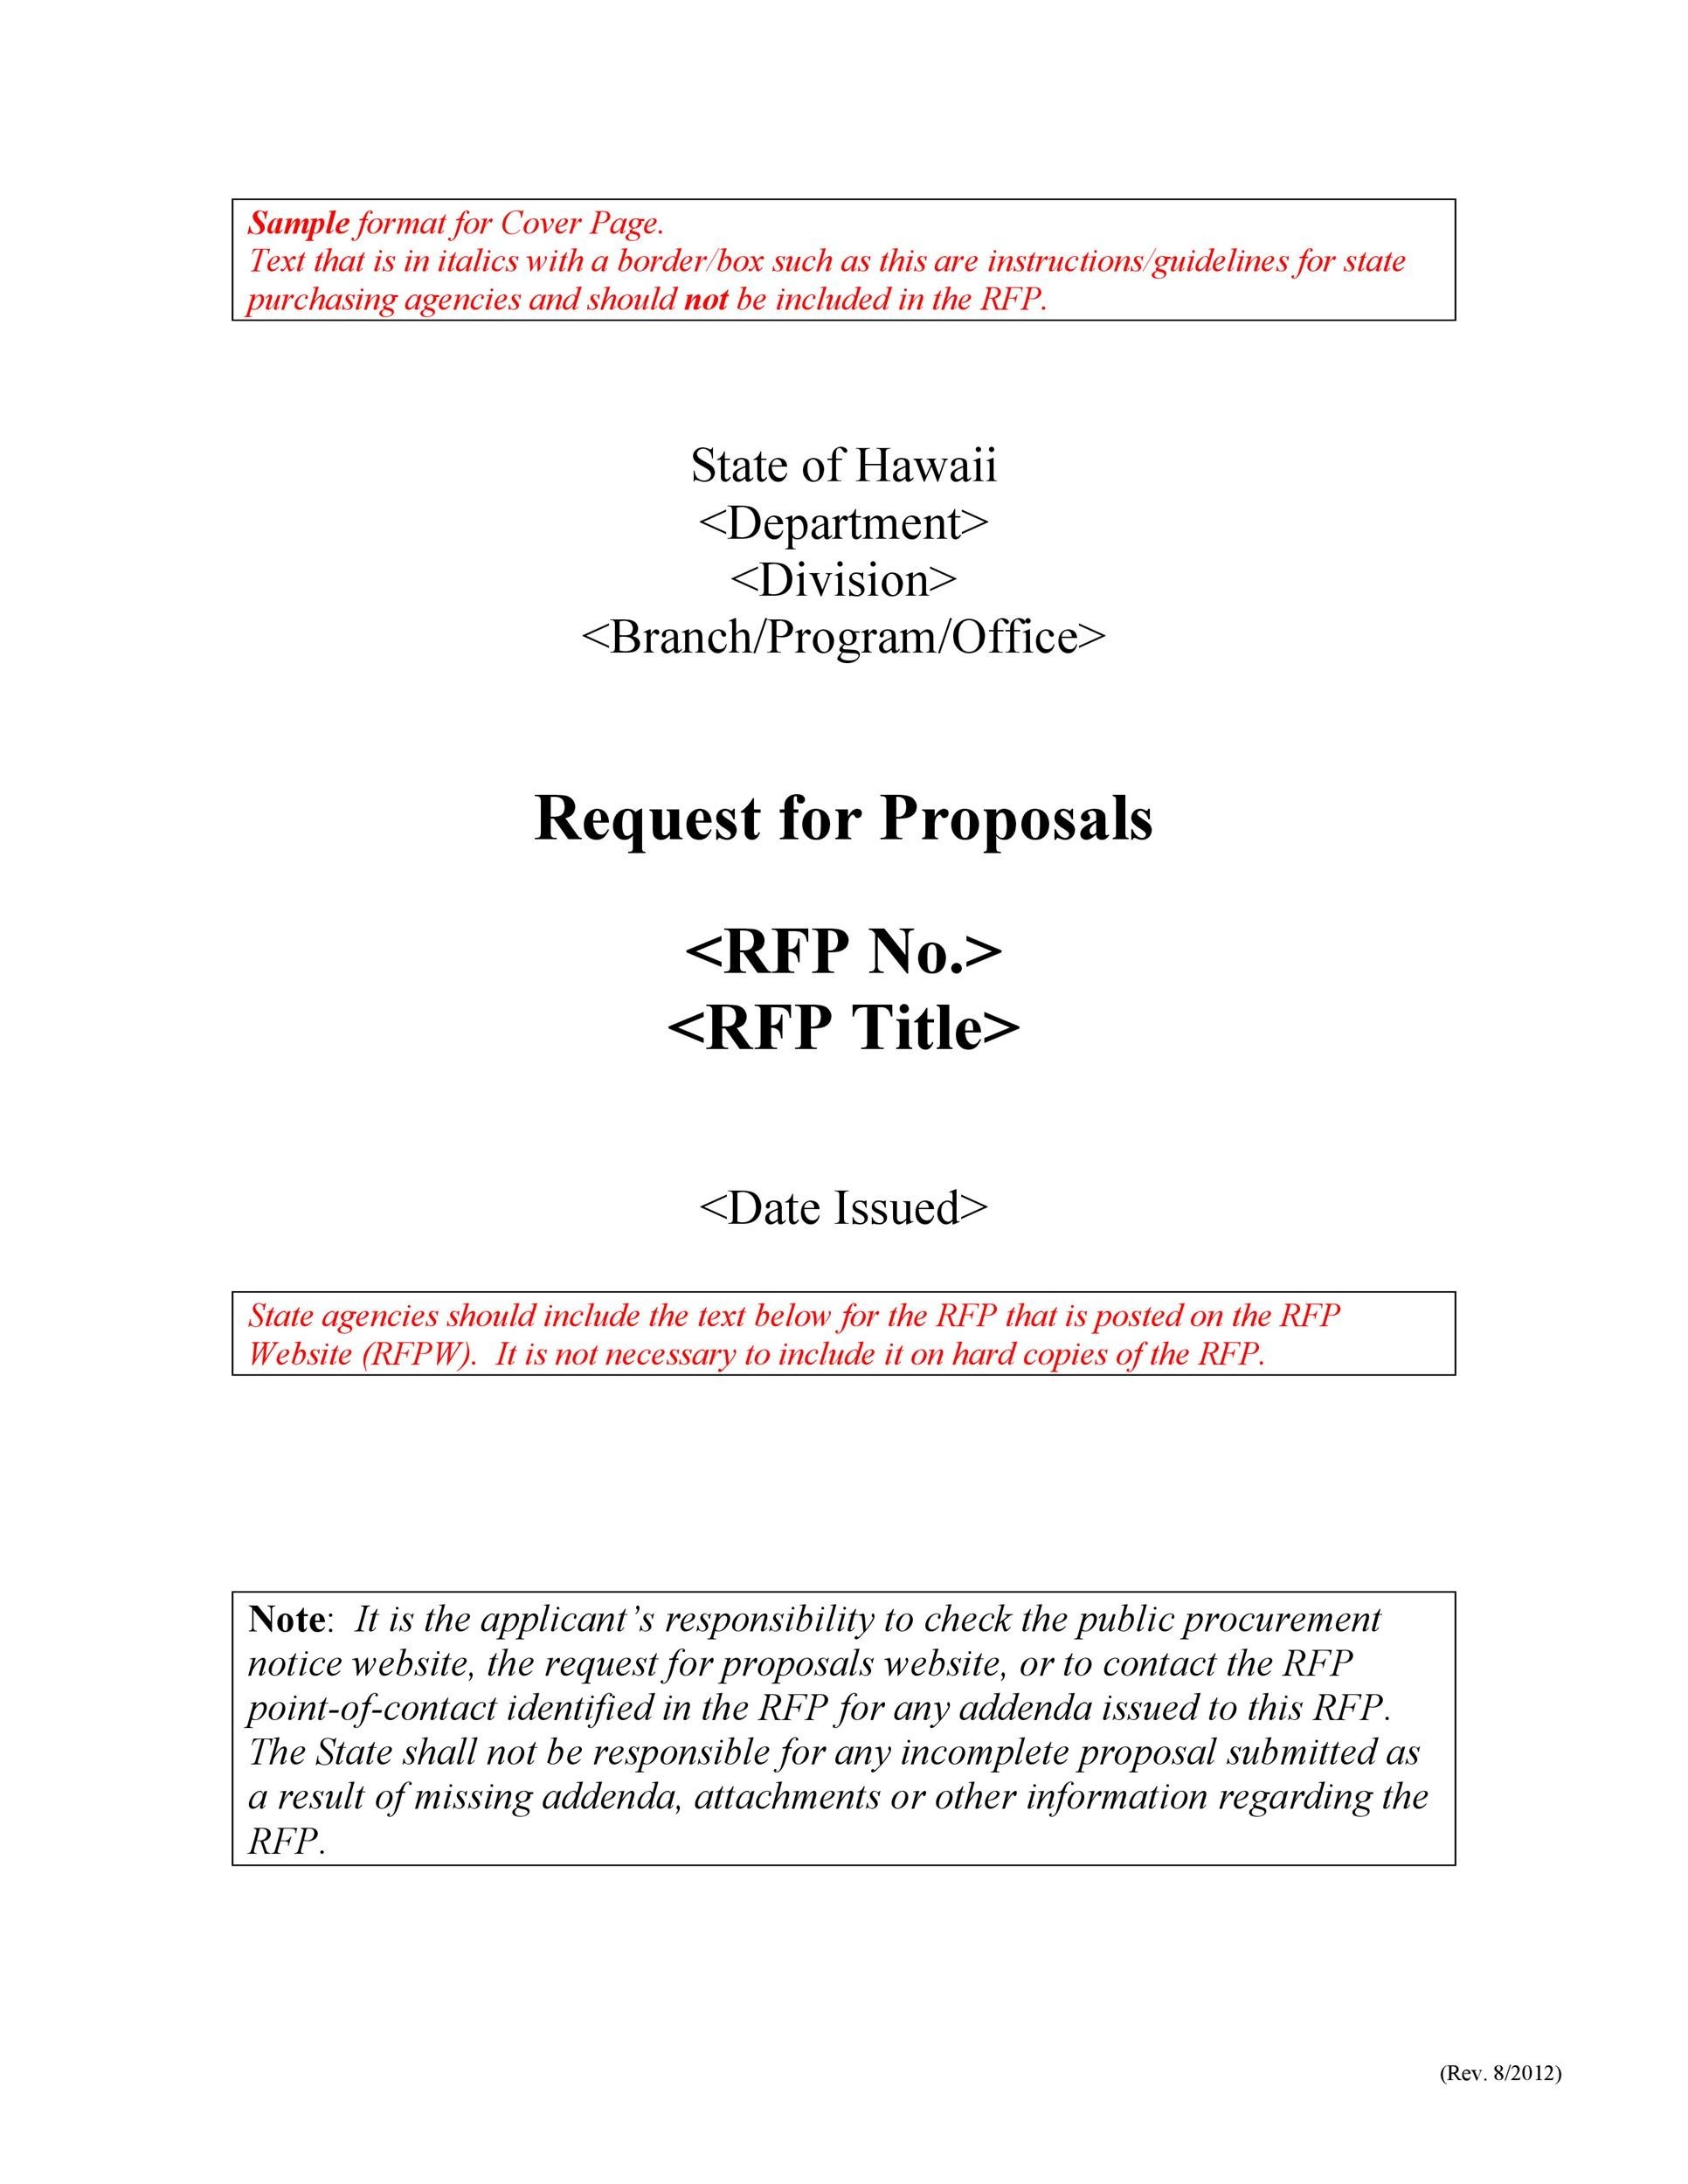 40+ Best Request for Proposal Templates & Examples (RPF Templates)